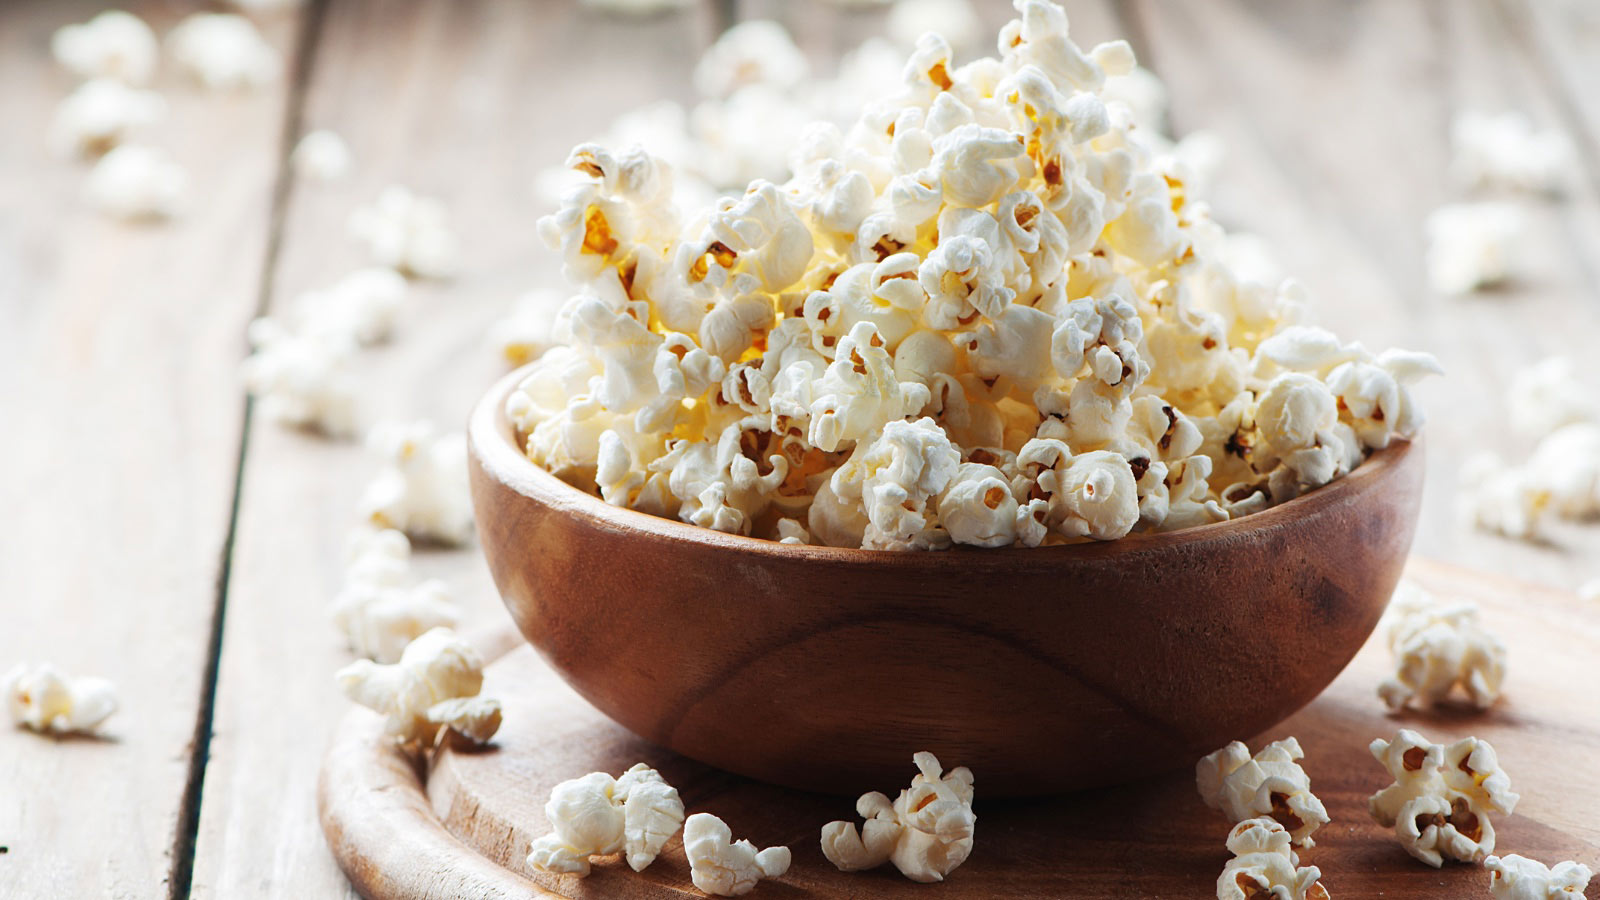 Popcorn on the wooden table, in a wooden bowl.